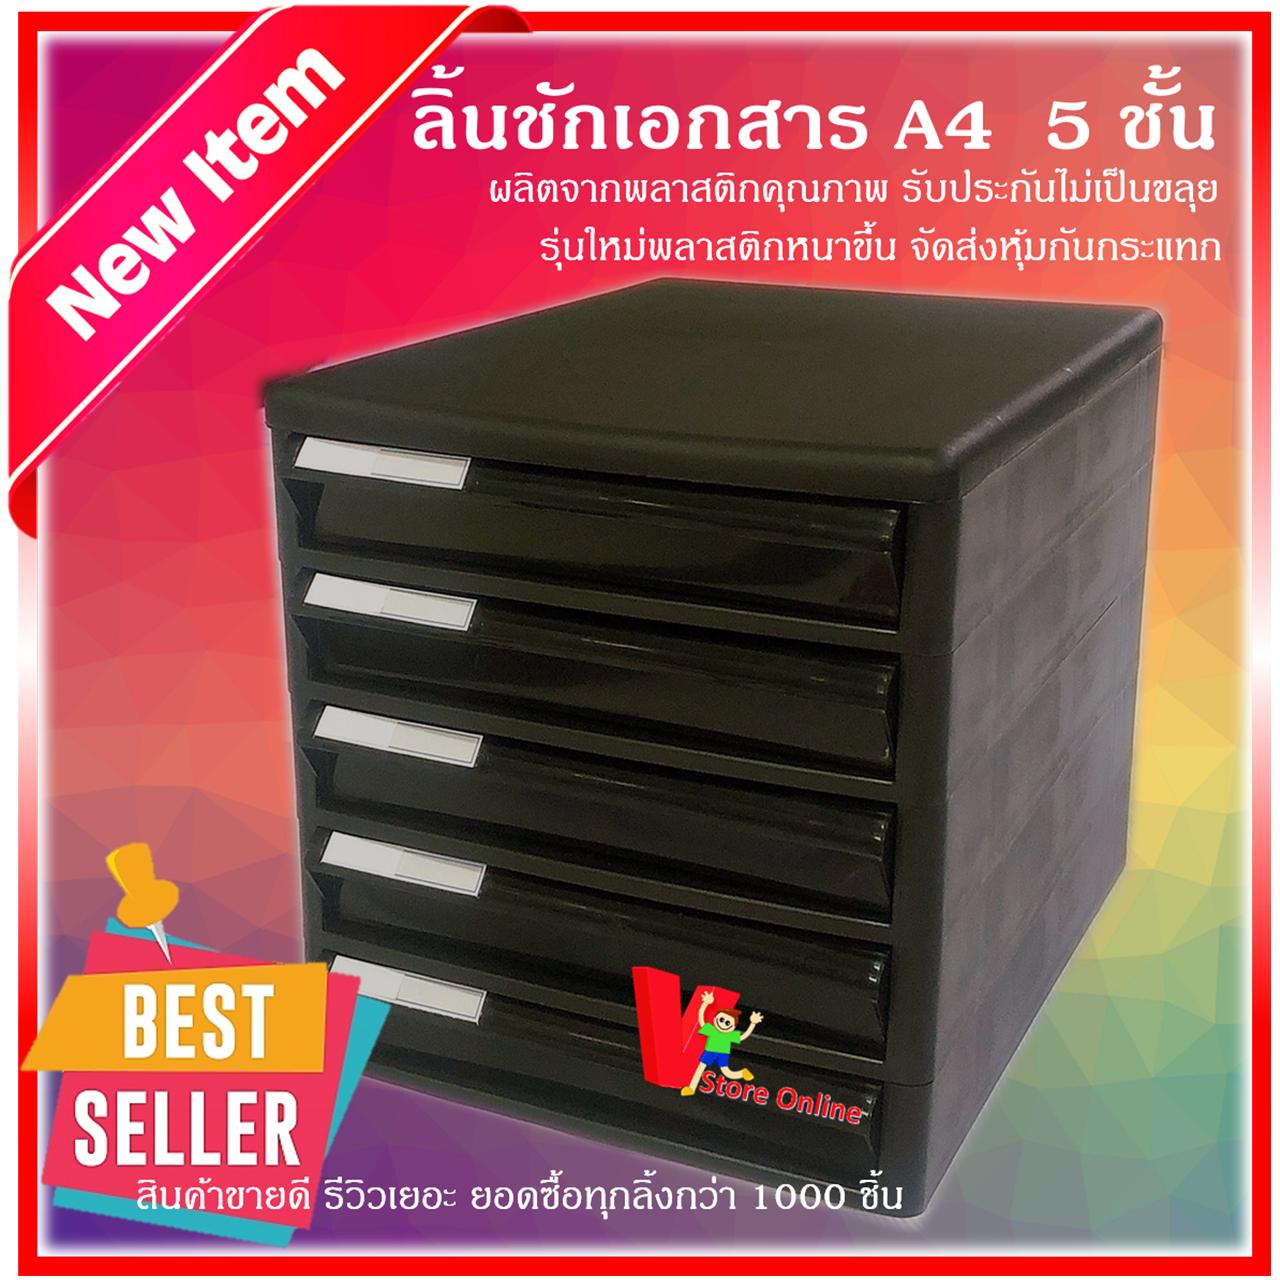 plastic documentary cabinet A4 paper size 5 stores